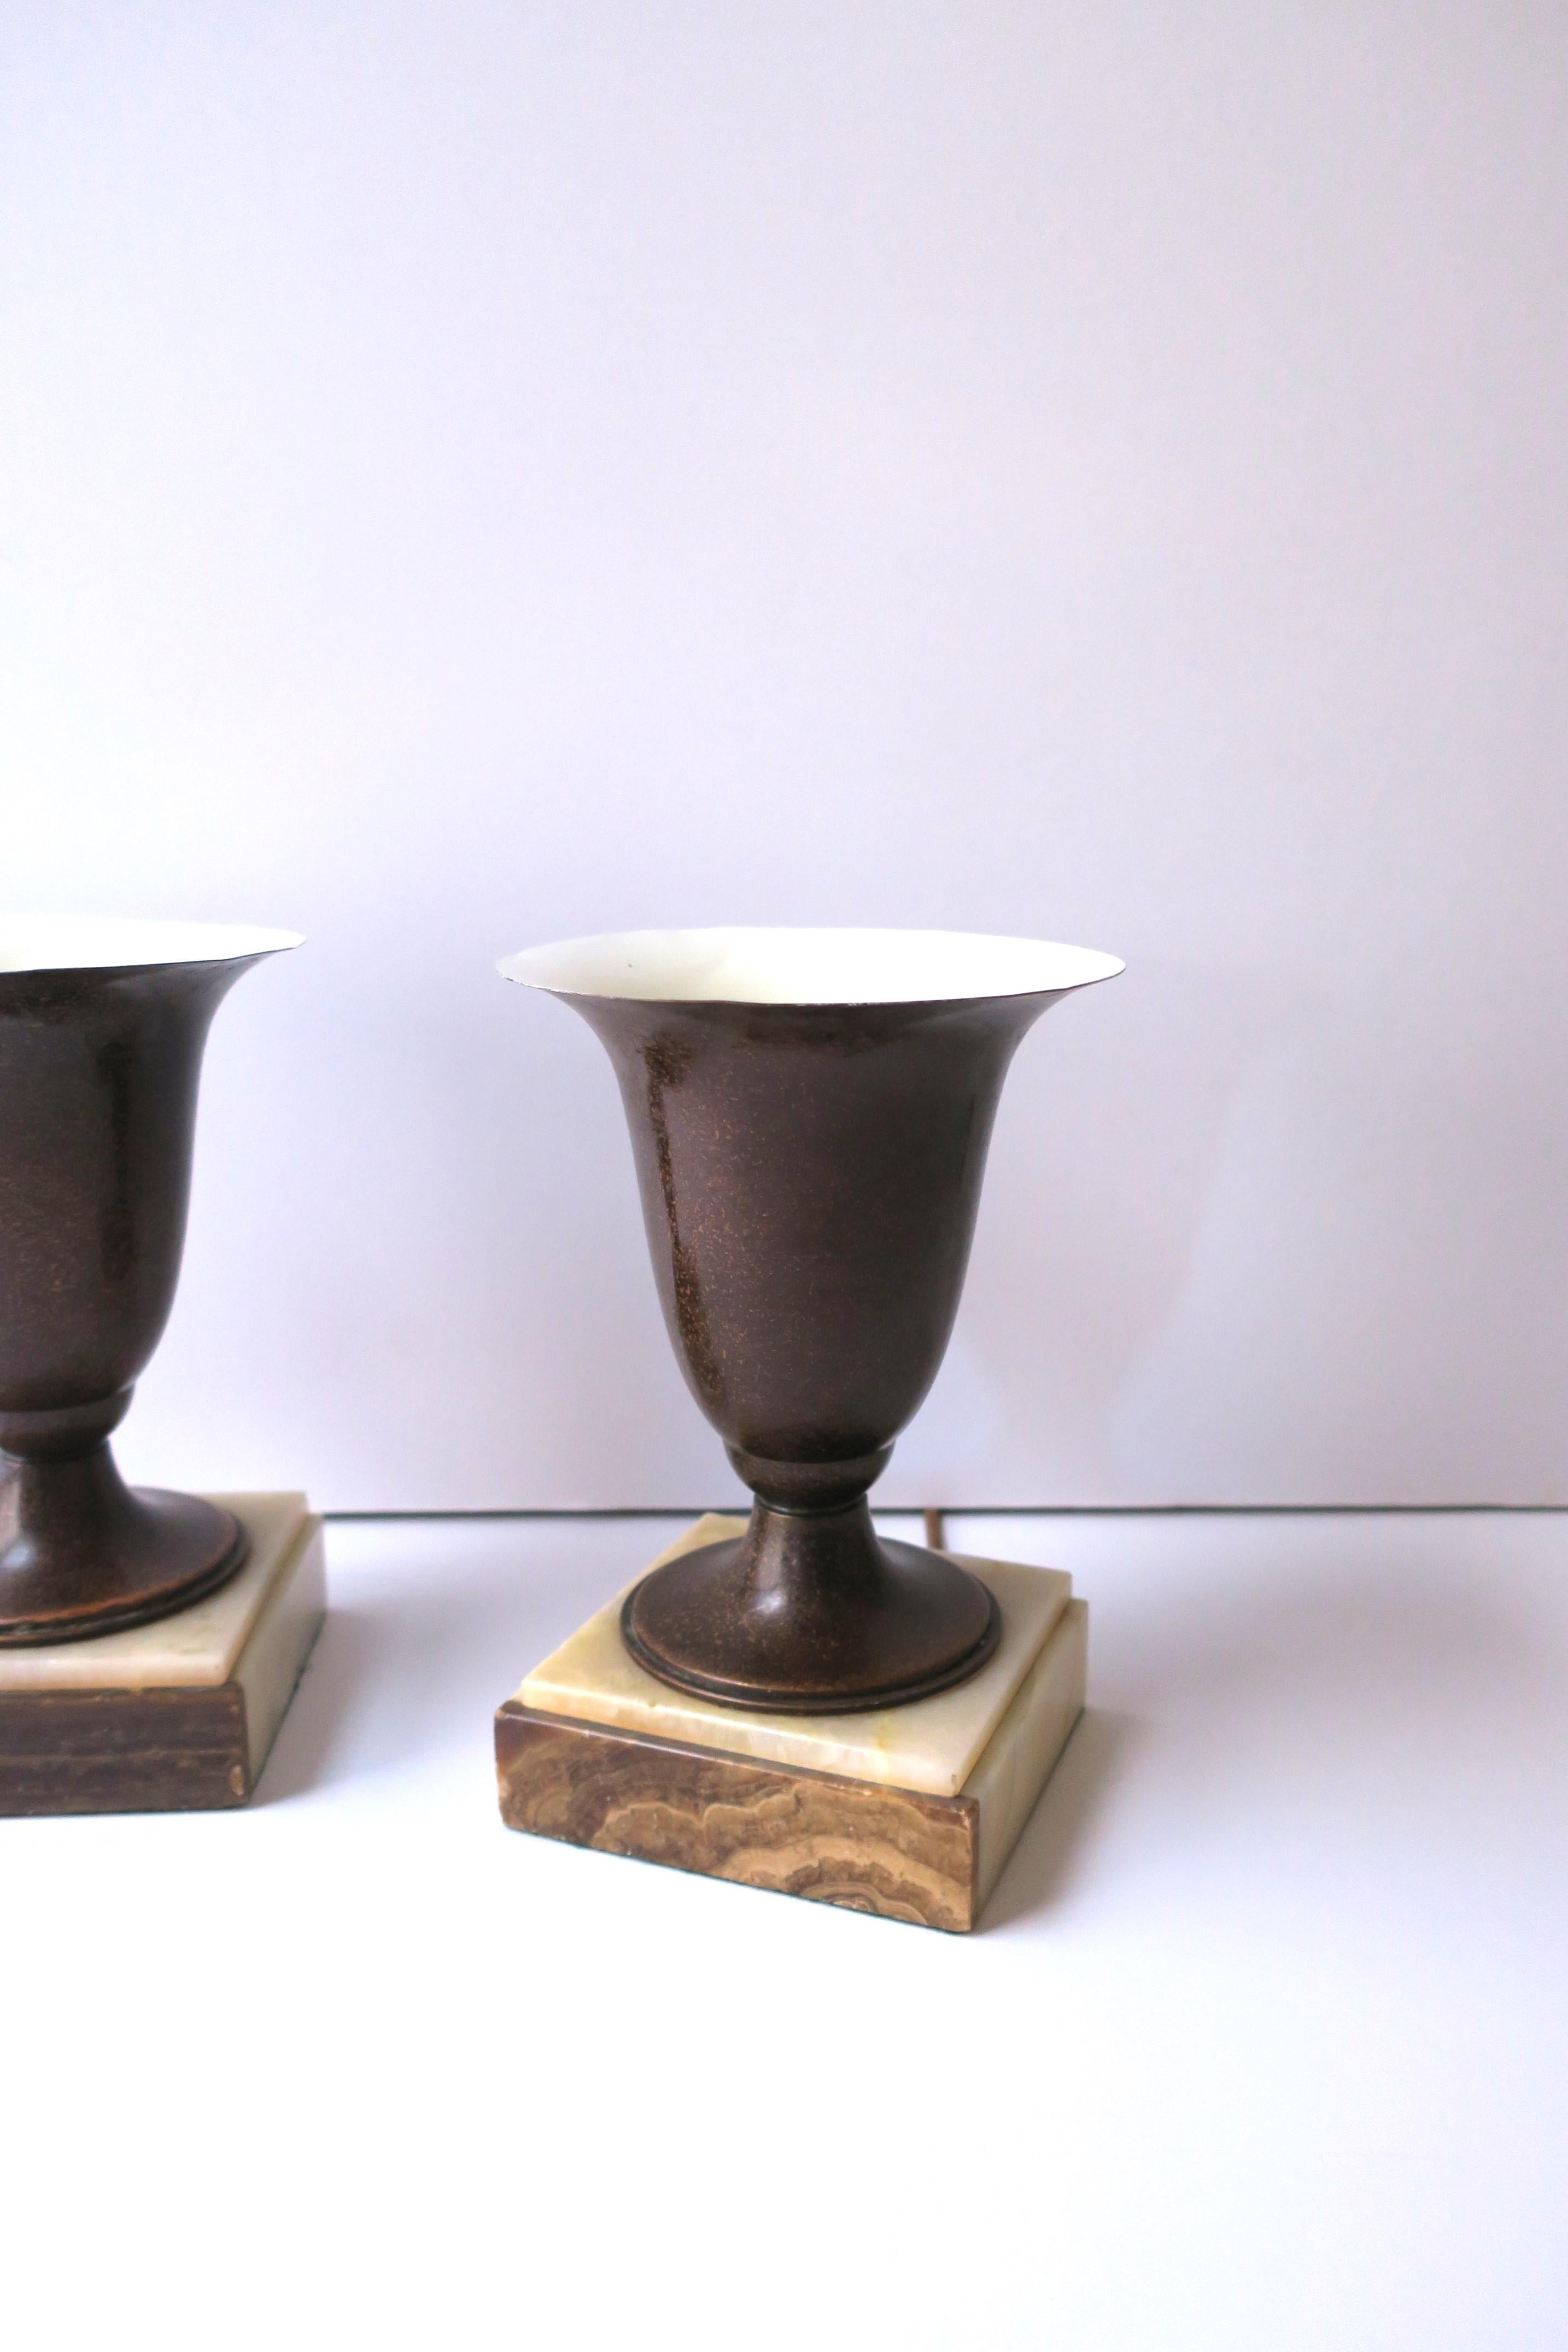 Art Deco Urn Form Table Lamps Onyx Marble Bases, Pair For Sale 2